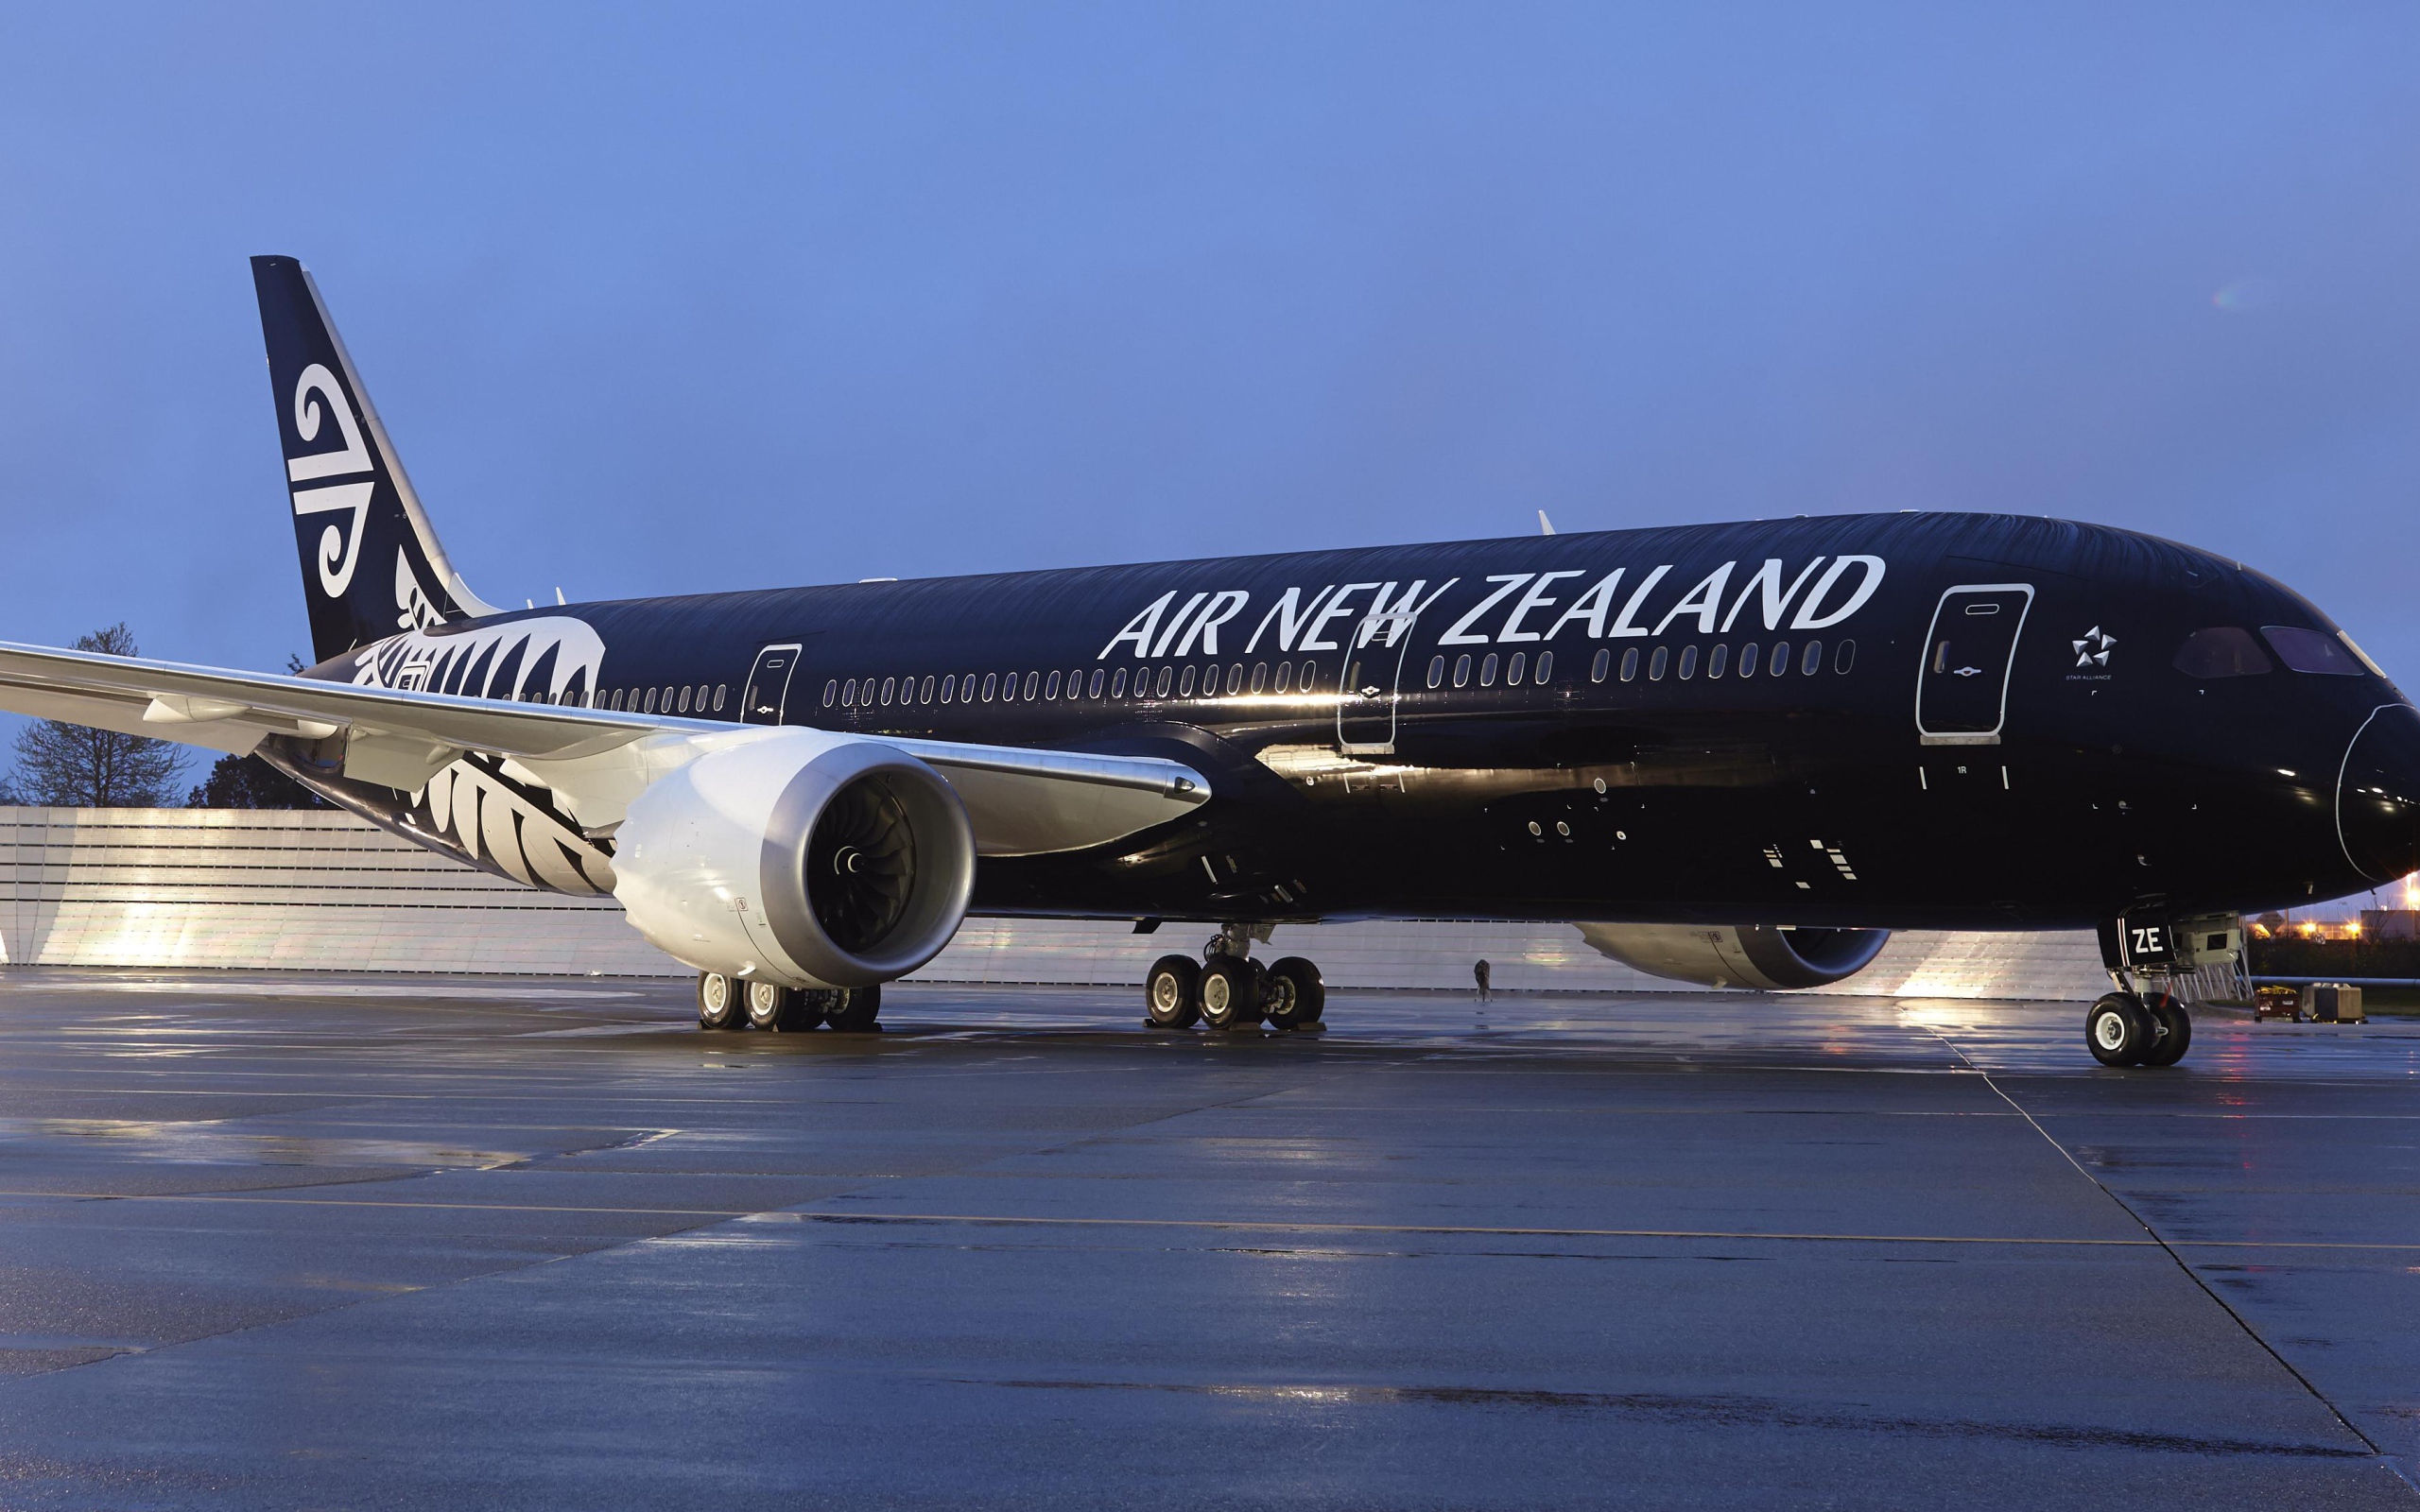 Air New Zealand plane at the airport